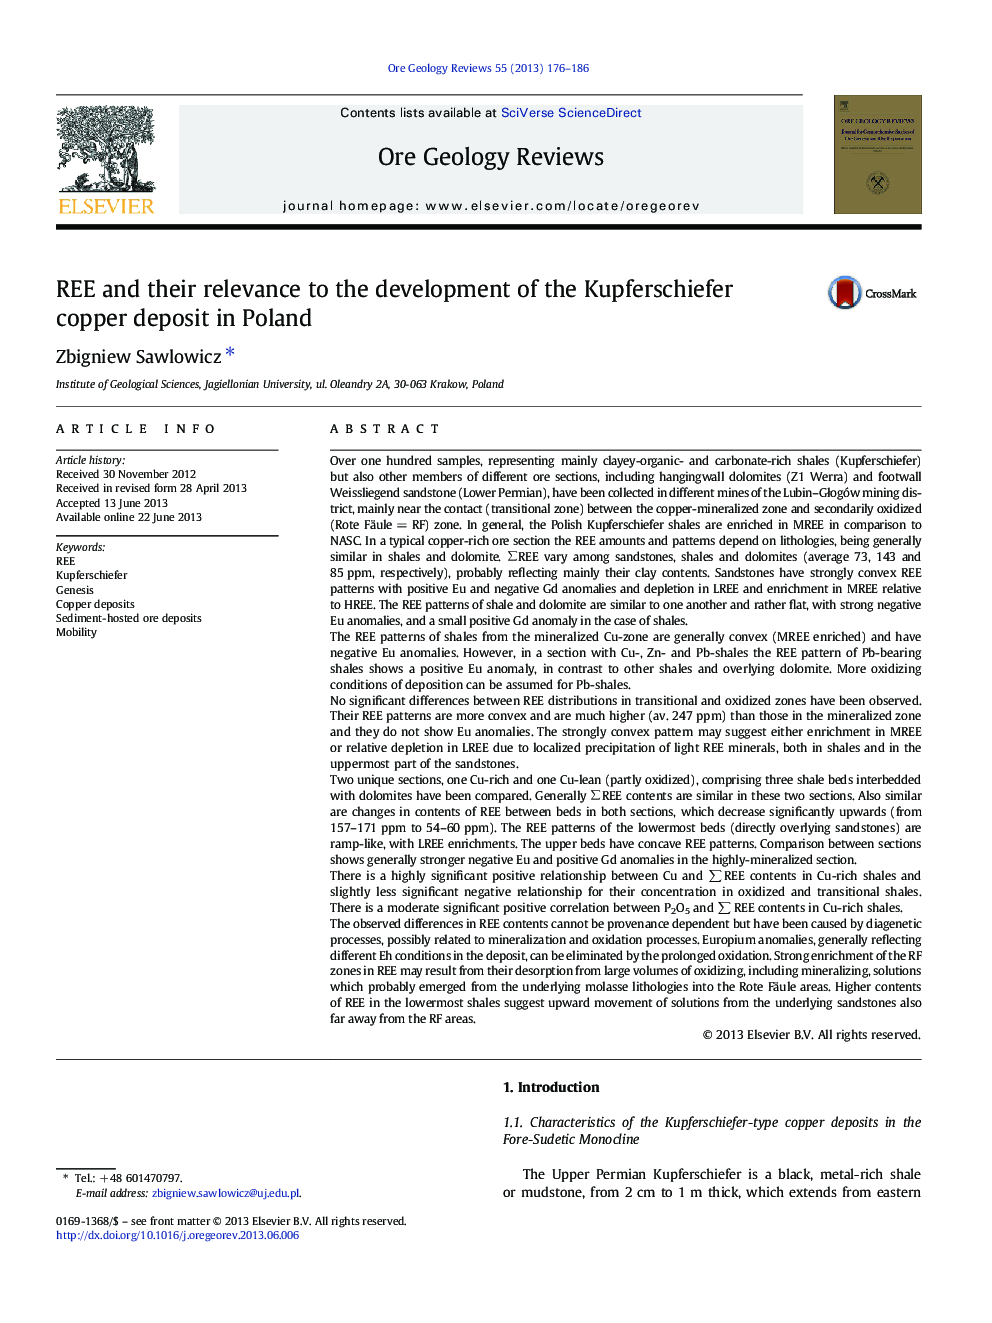 REE and their relevance to the development of the Kupferschiefer copper deposit in Poland